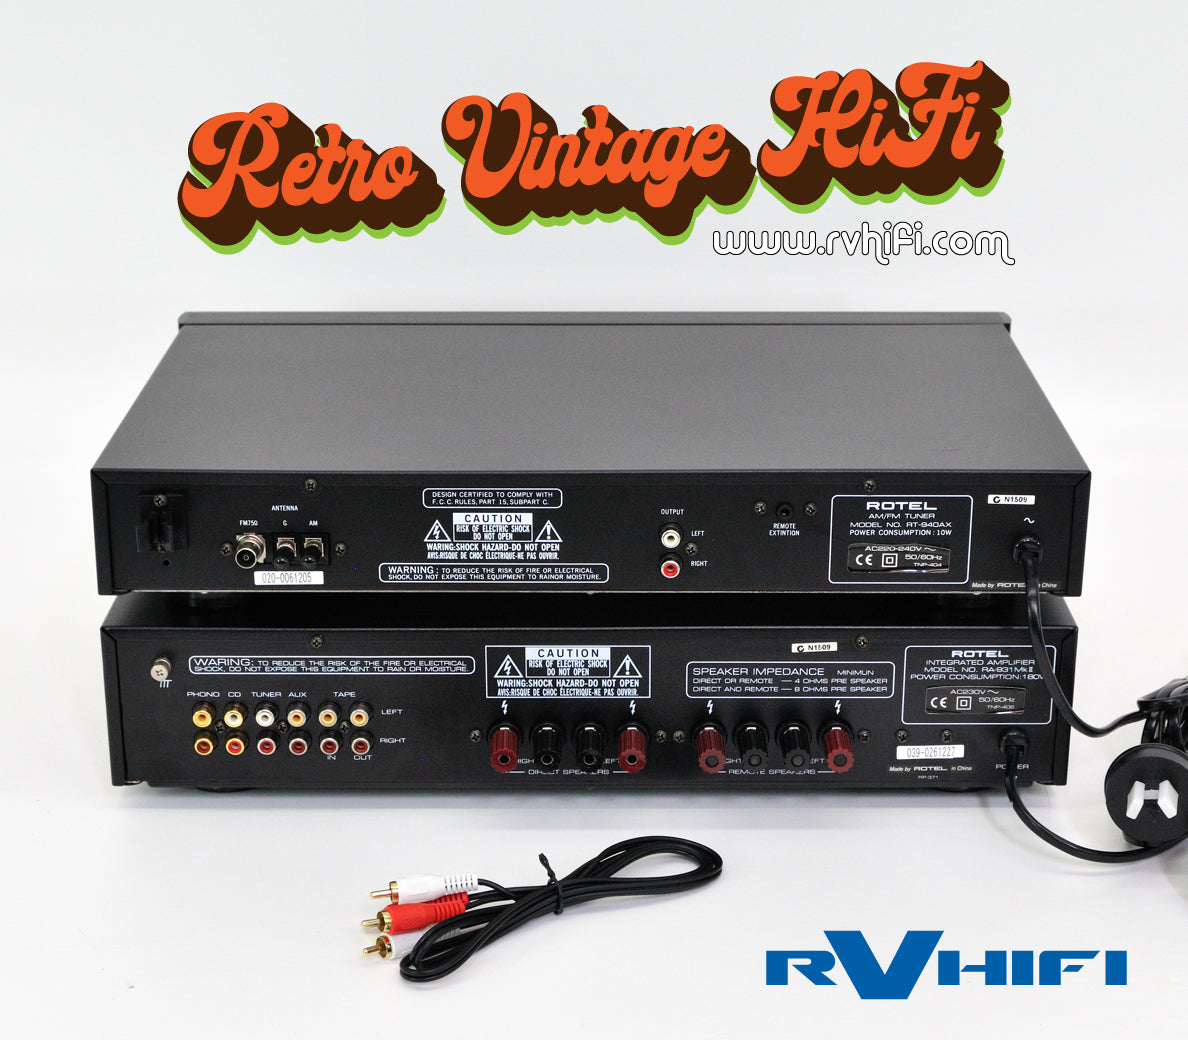 ROTEL RA-931 MK II Stereo Integrated Amplifier RT-940AX  AM/FM Stereo Tuner Combo Retro Vintage Audio at RV HI FI